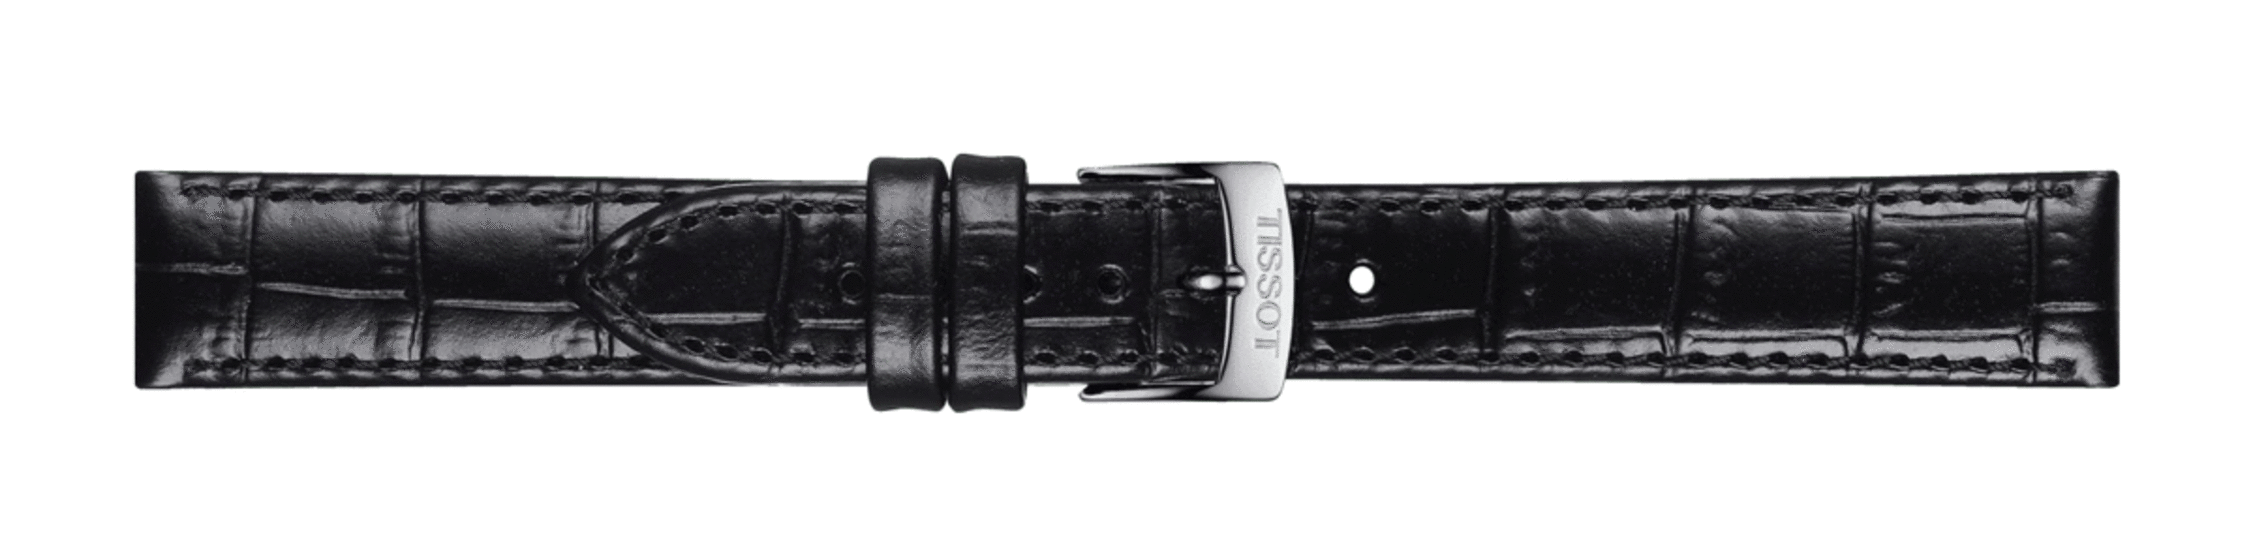 TISSOT T852.043.622 OFFICIAL BLACK LEATHER STRAP LUGS 15 MM